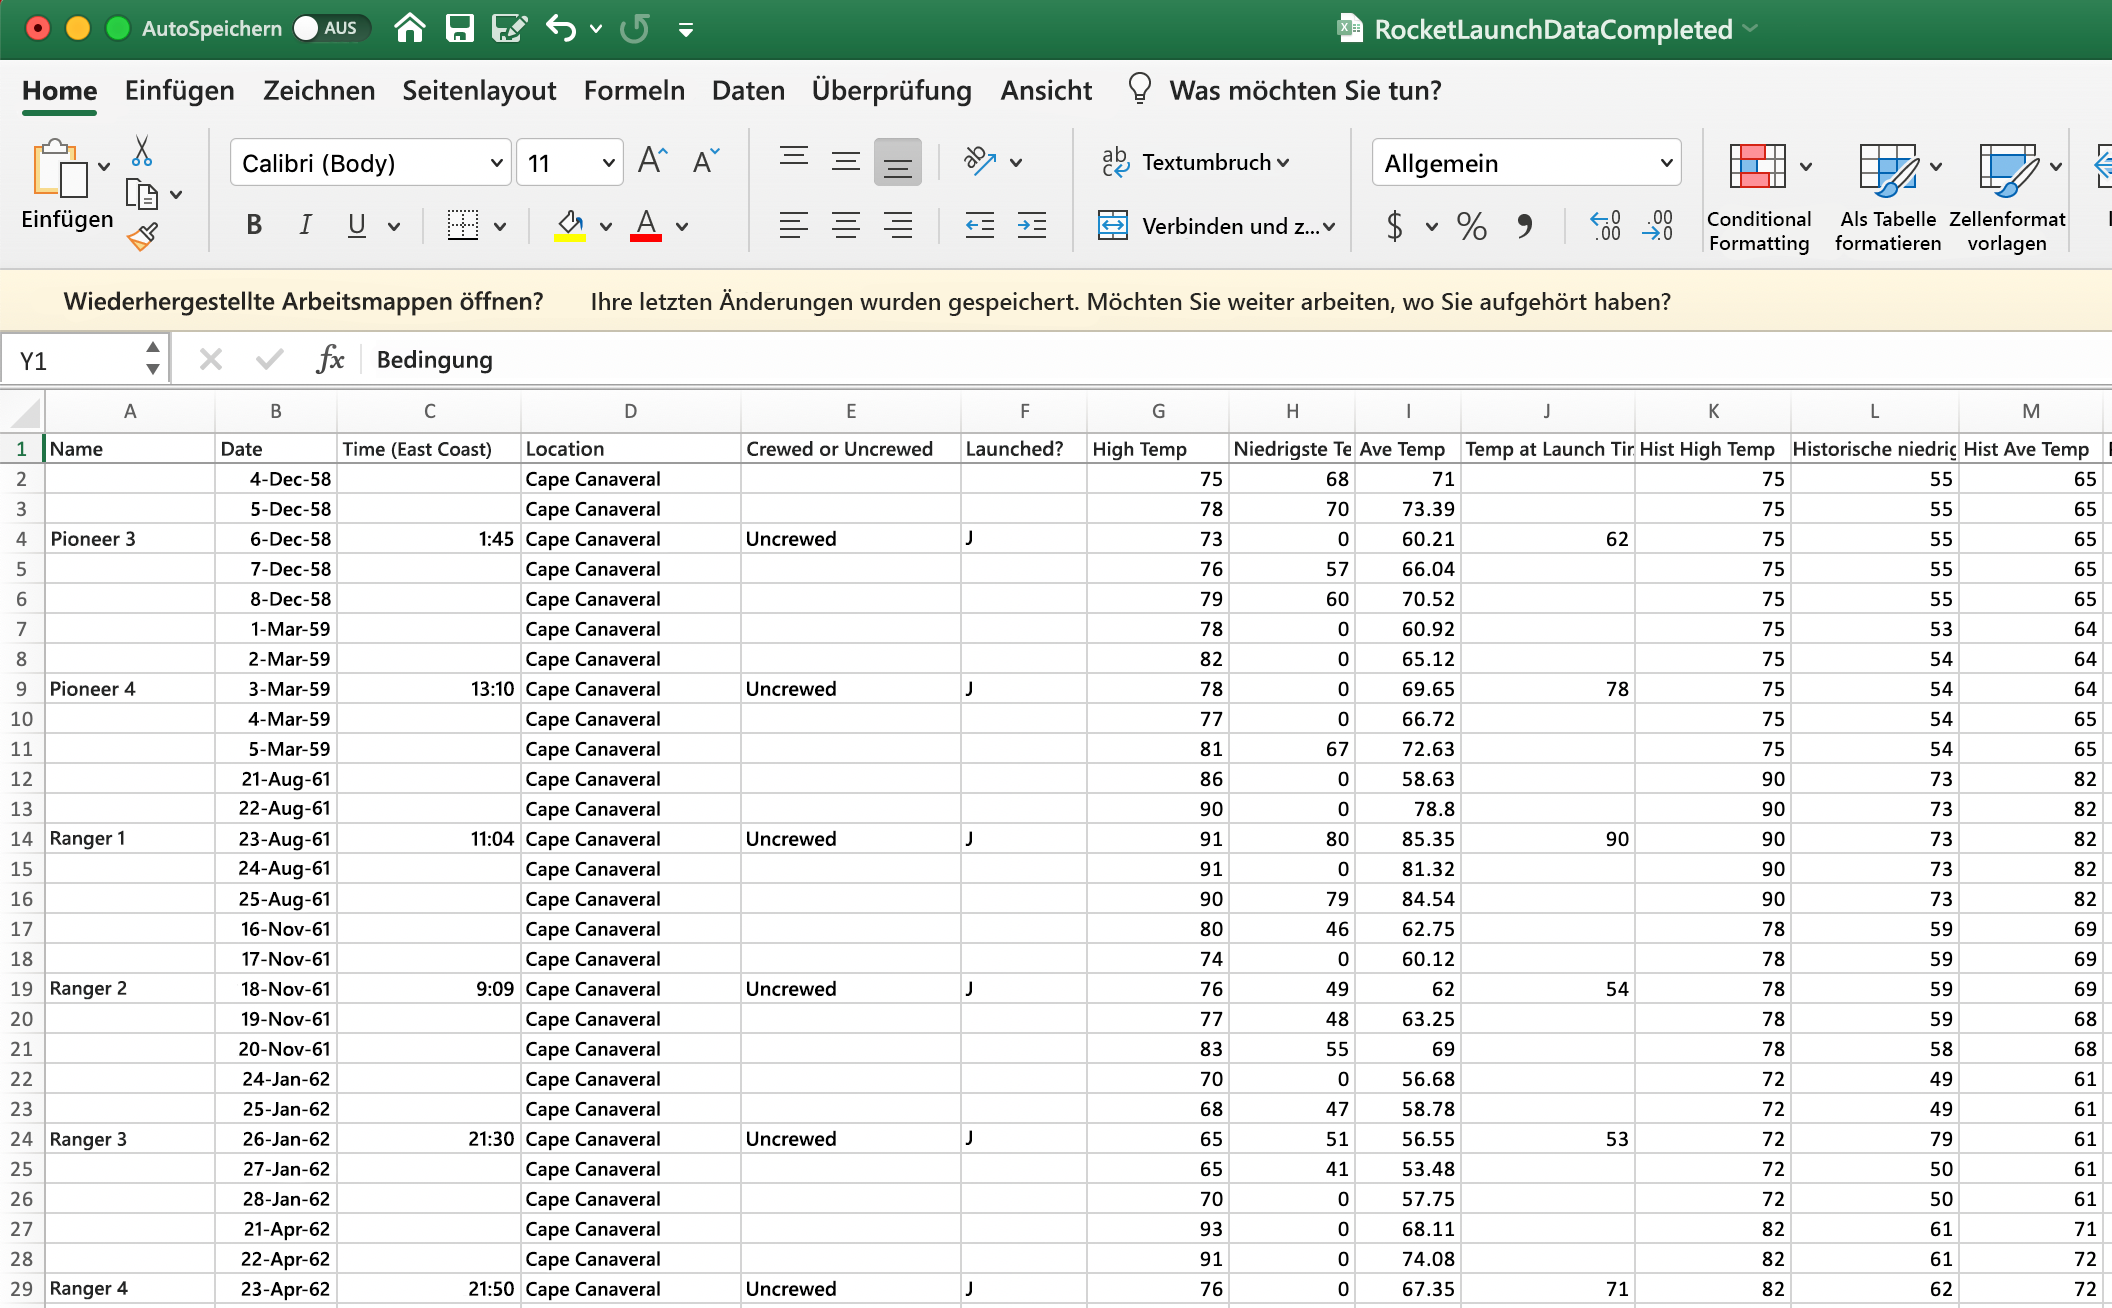 Screenshot that shows Excel data.